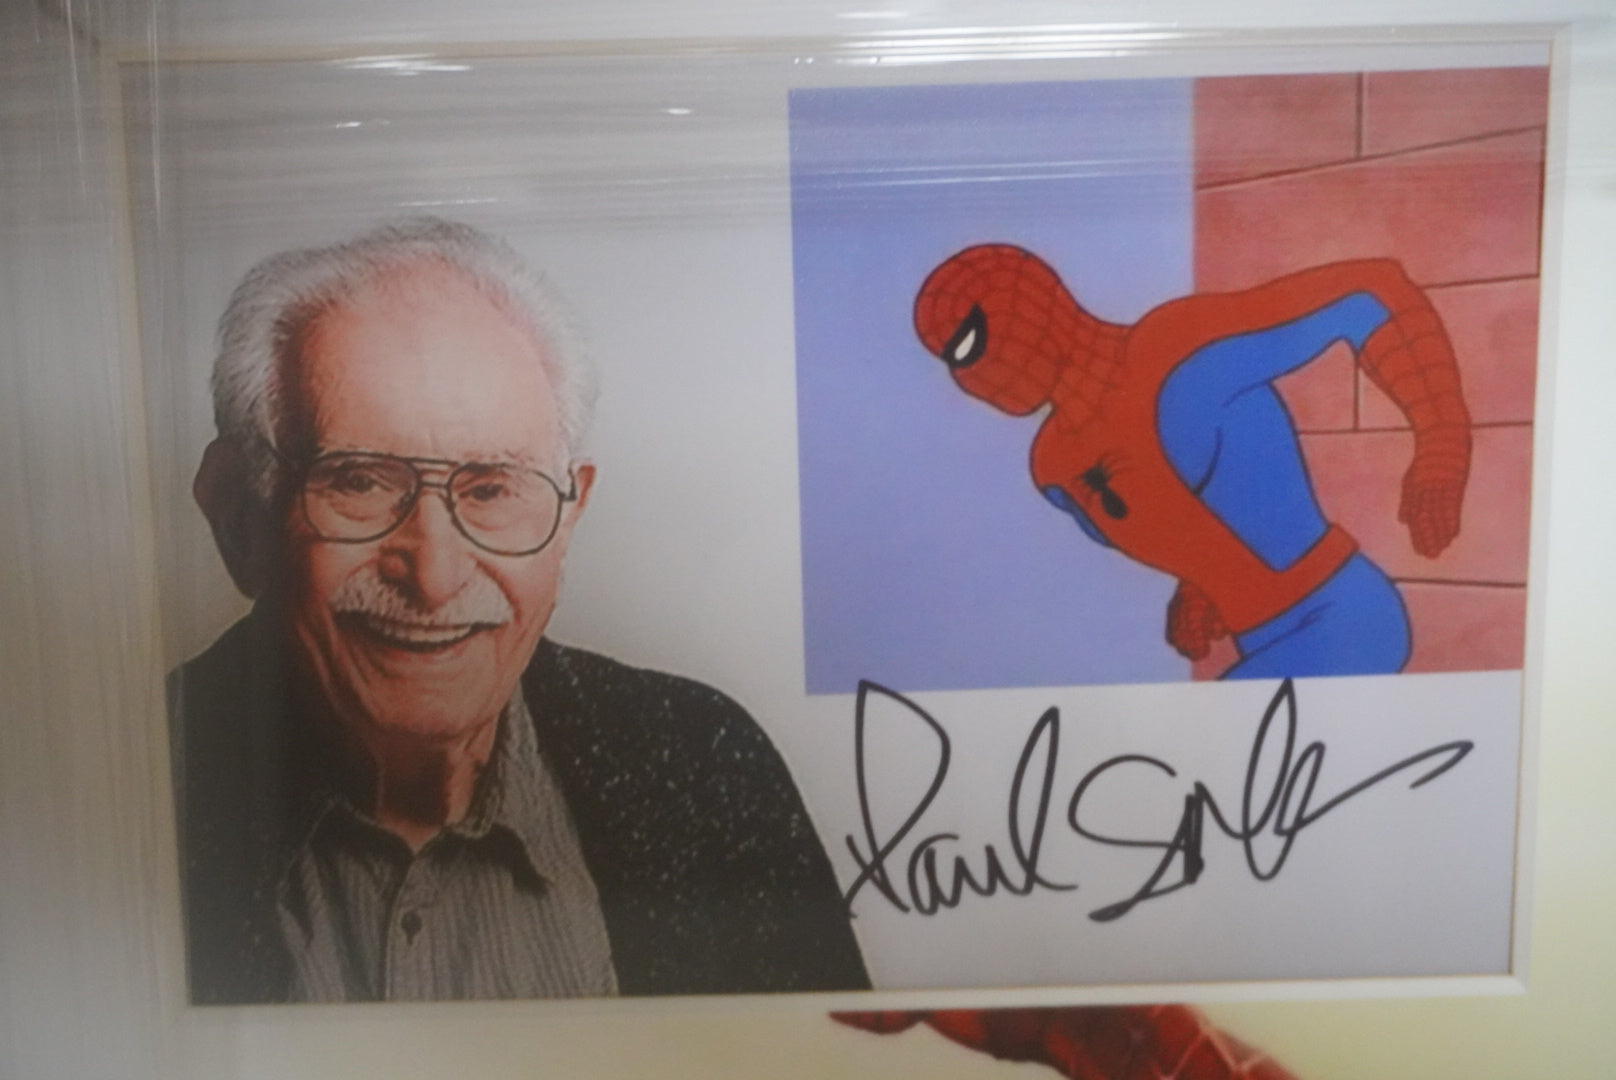 Spider-Man Tom Holland, Andrew Garfield, Paul Soles, Tobey Maguire 5 x 7 photos framed signed